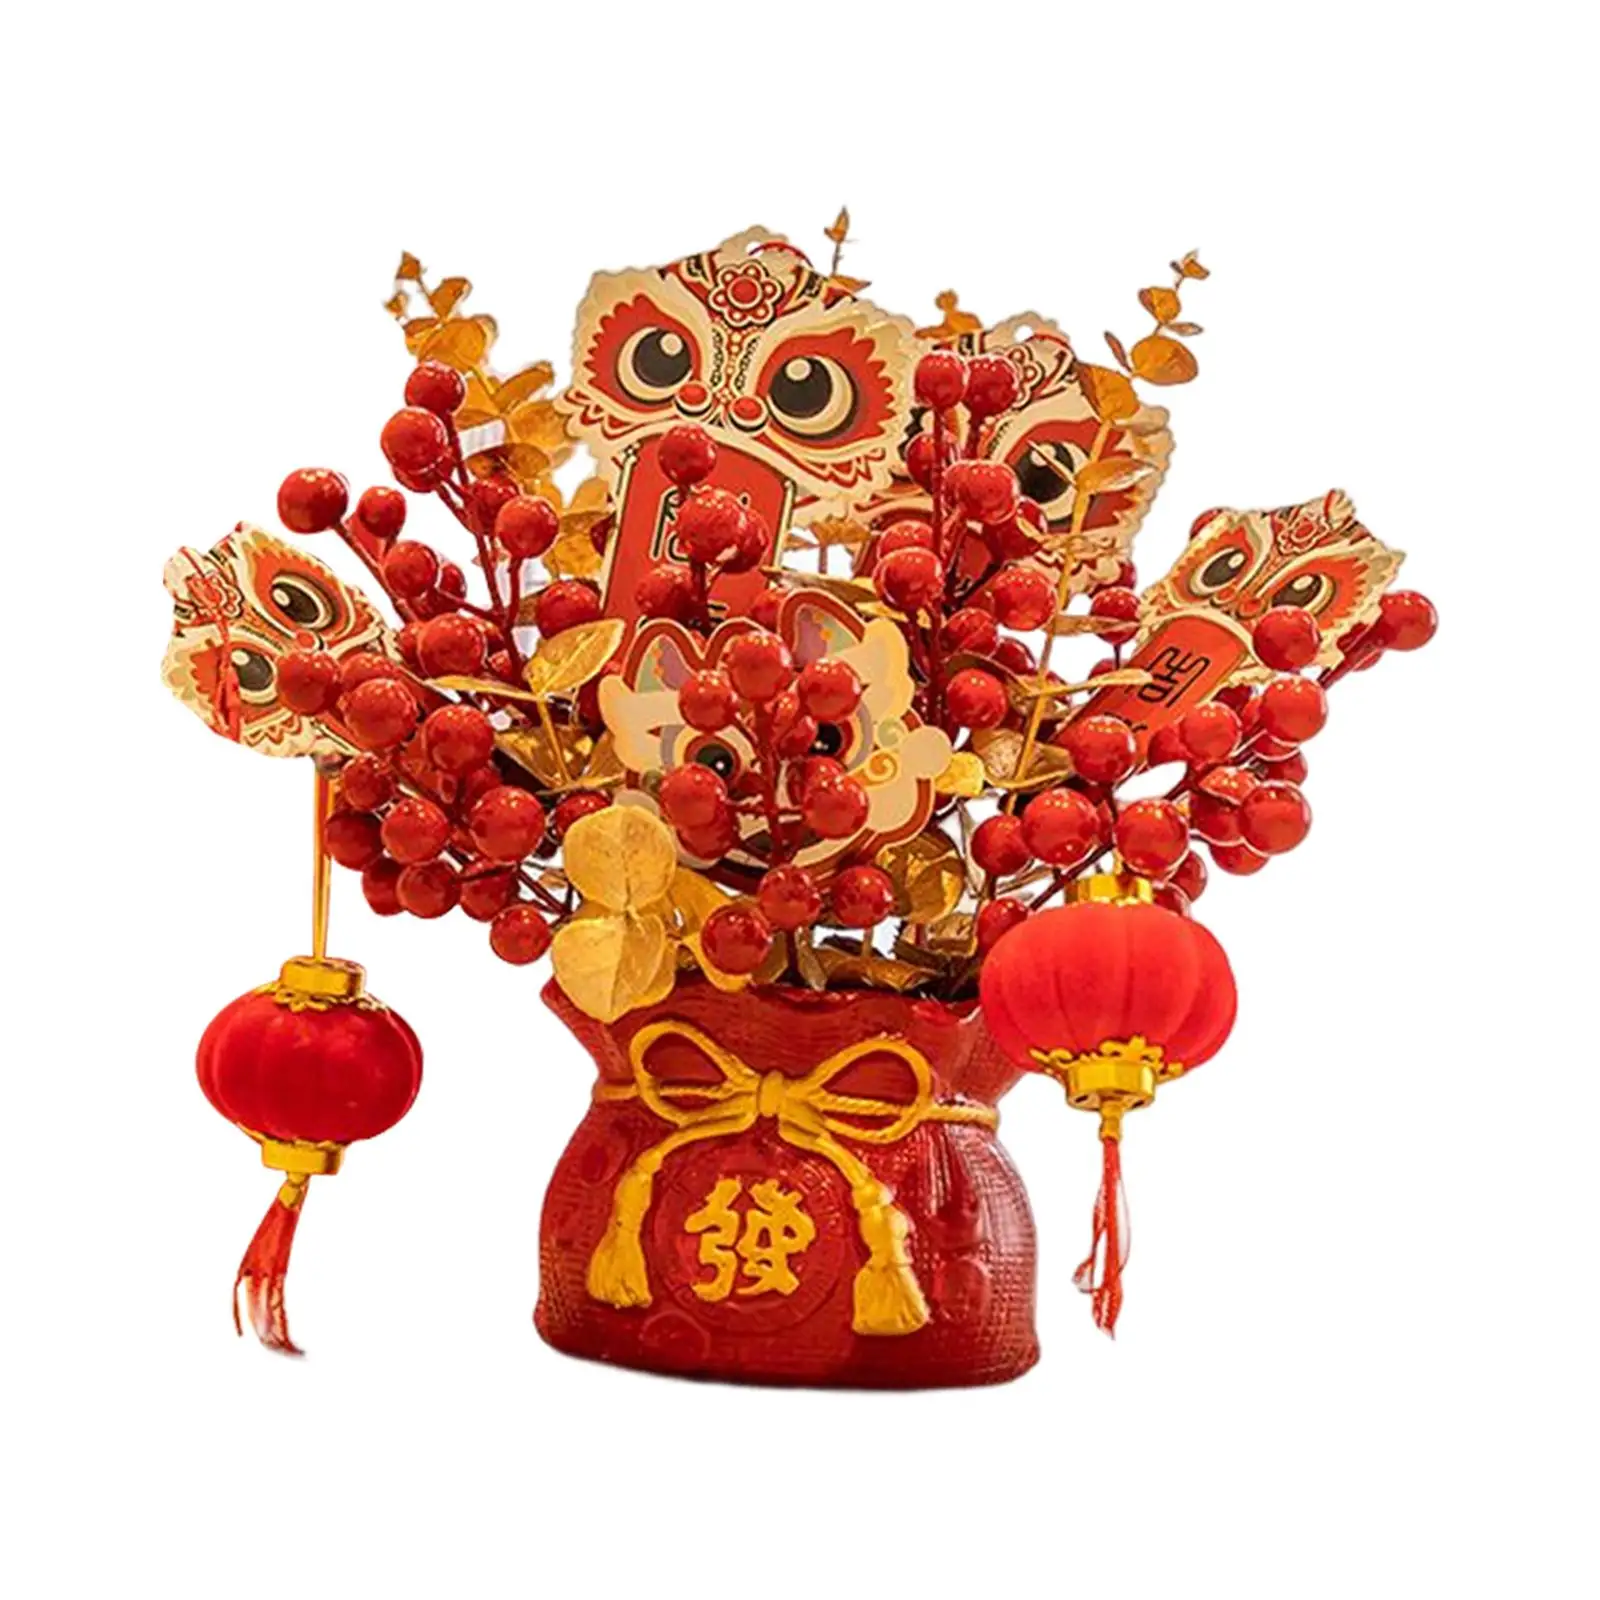 Artificial Potted Flower Table Centerpiece Planters Lion Lantern Ornaments Metal Eucalyptus Vase for Home Holiday Indoor Office